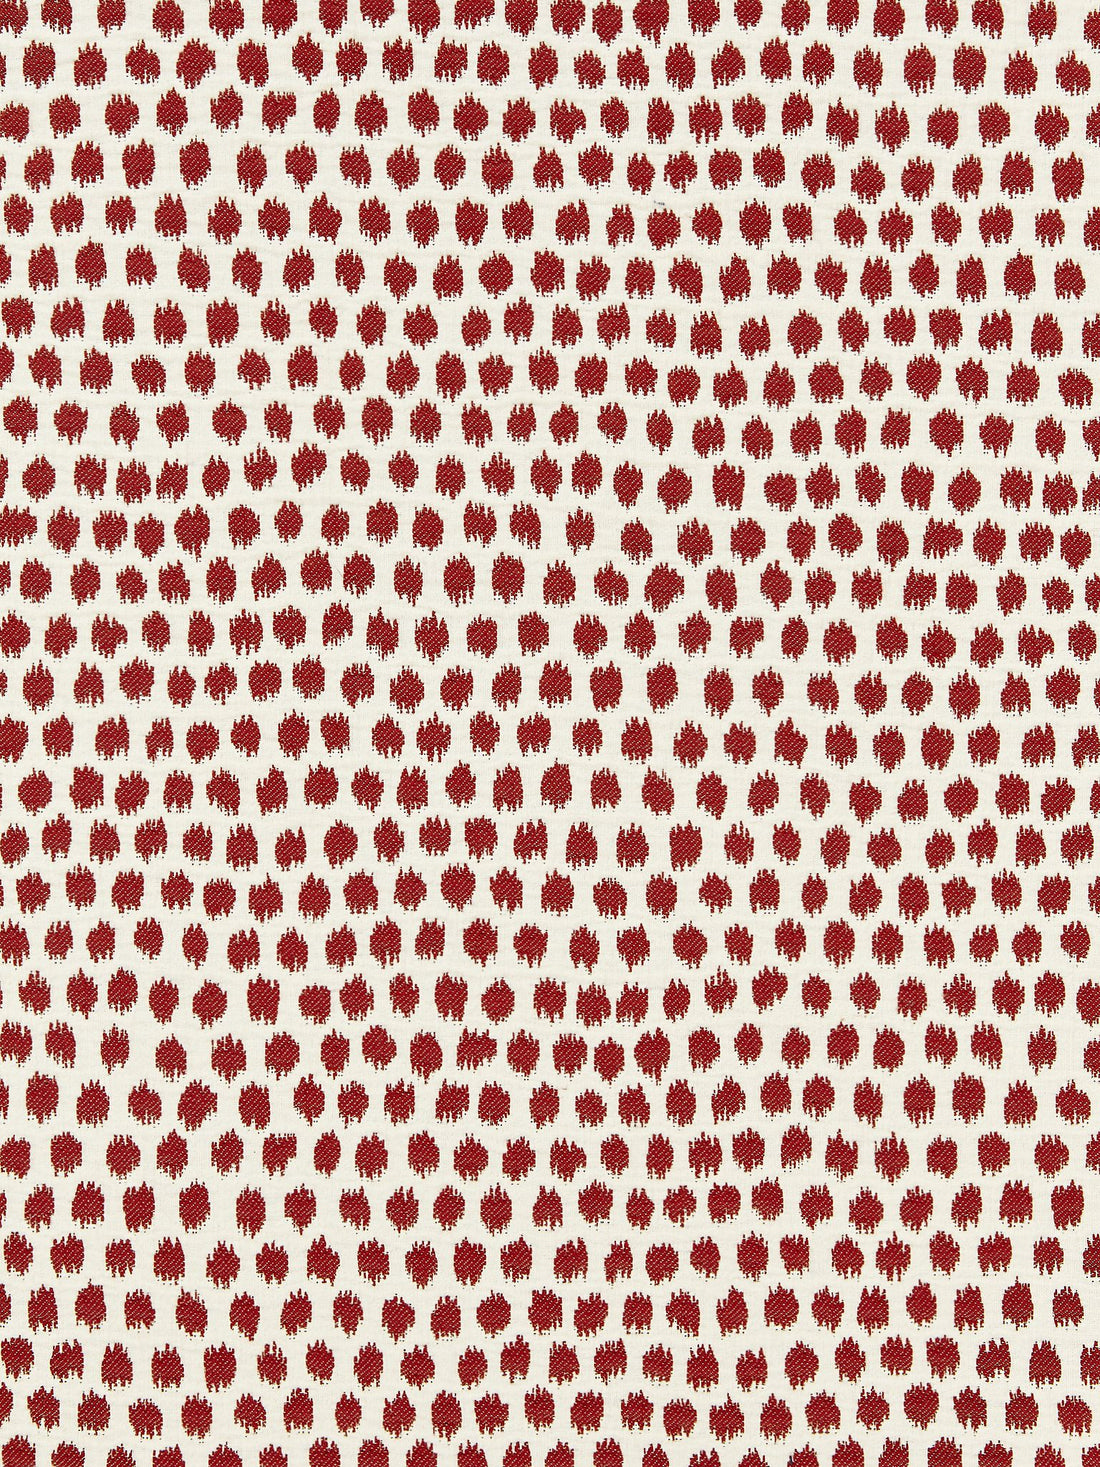 Dot Weave fabric in carnelian color - pattern number SC 000327182 - by Scalamandre in the Scalamandre Fabrics Book 1 collection